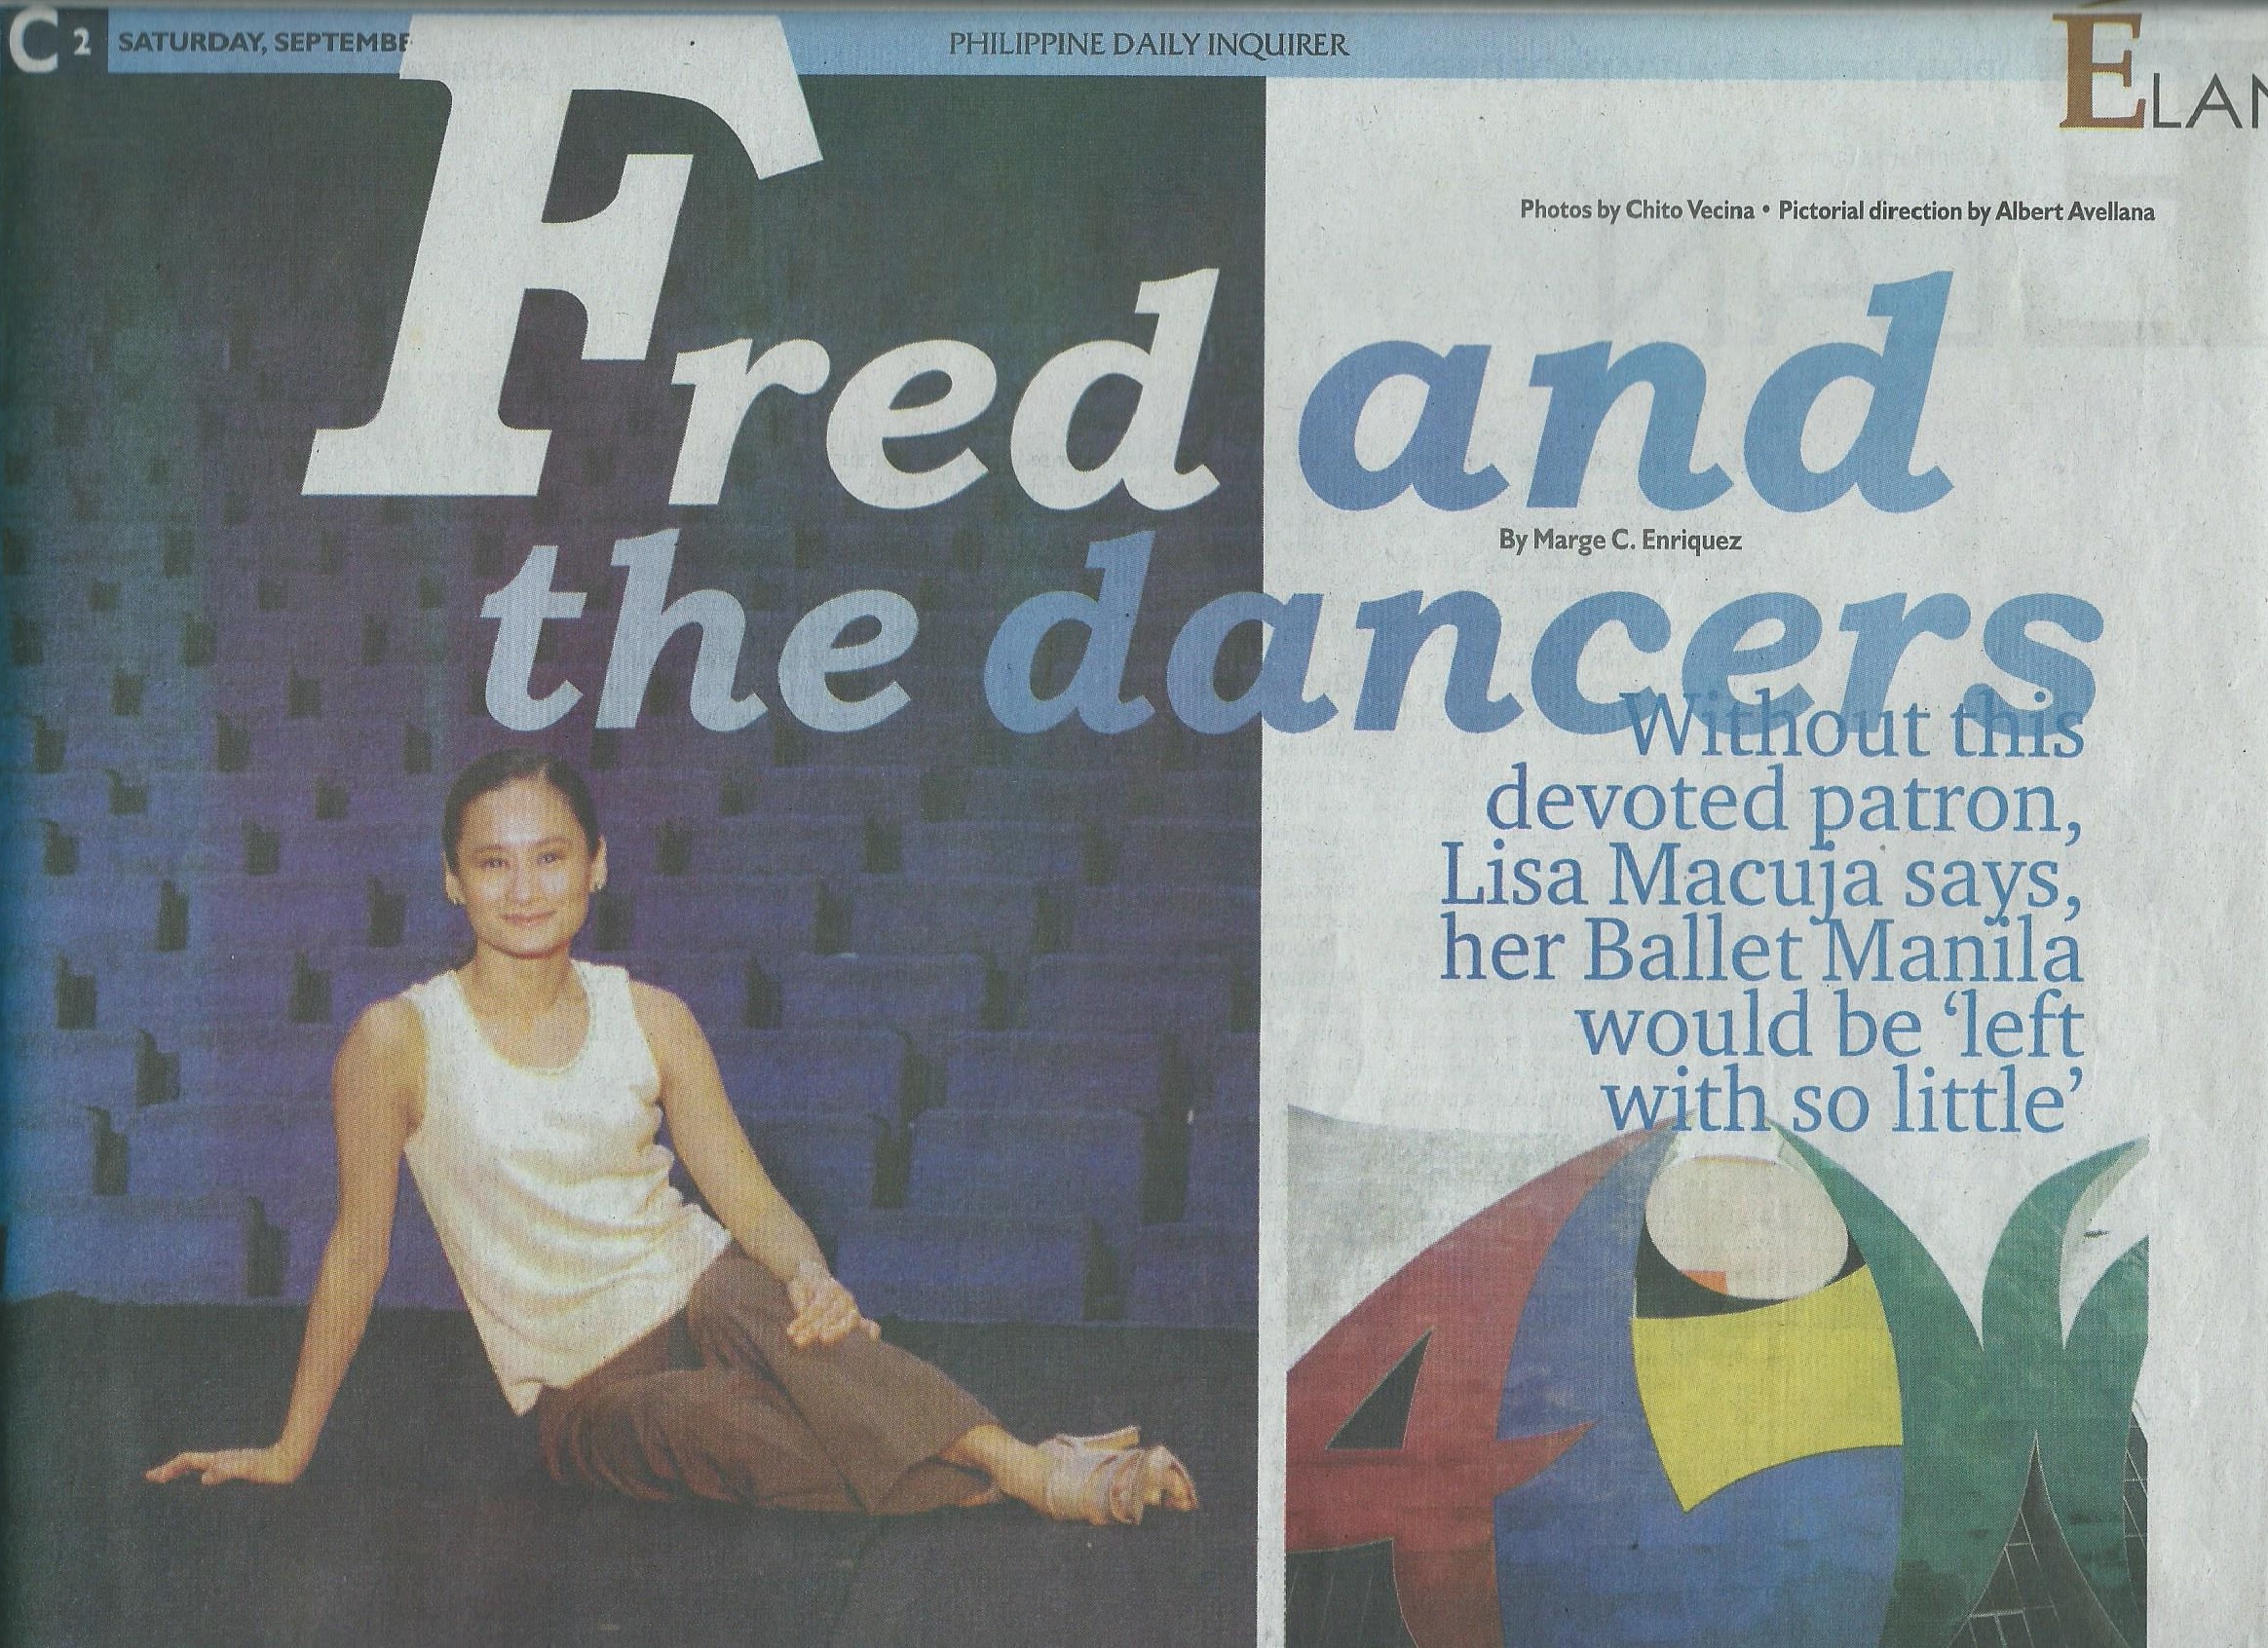  A feature in the  Philippine Daily Inquirer  in 2002 relates the various ways Fred has supported Lisa and Ballet Manila. 